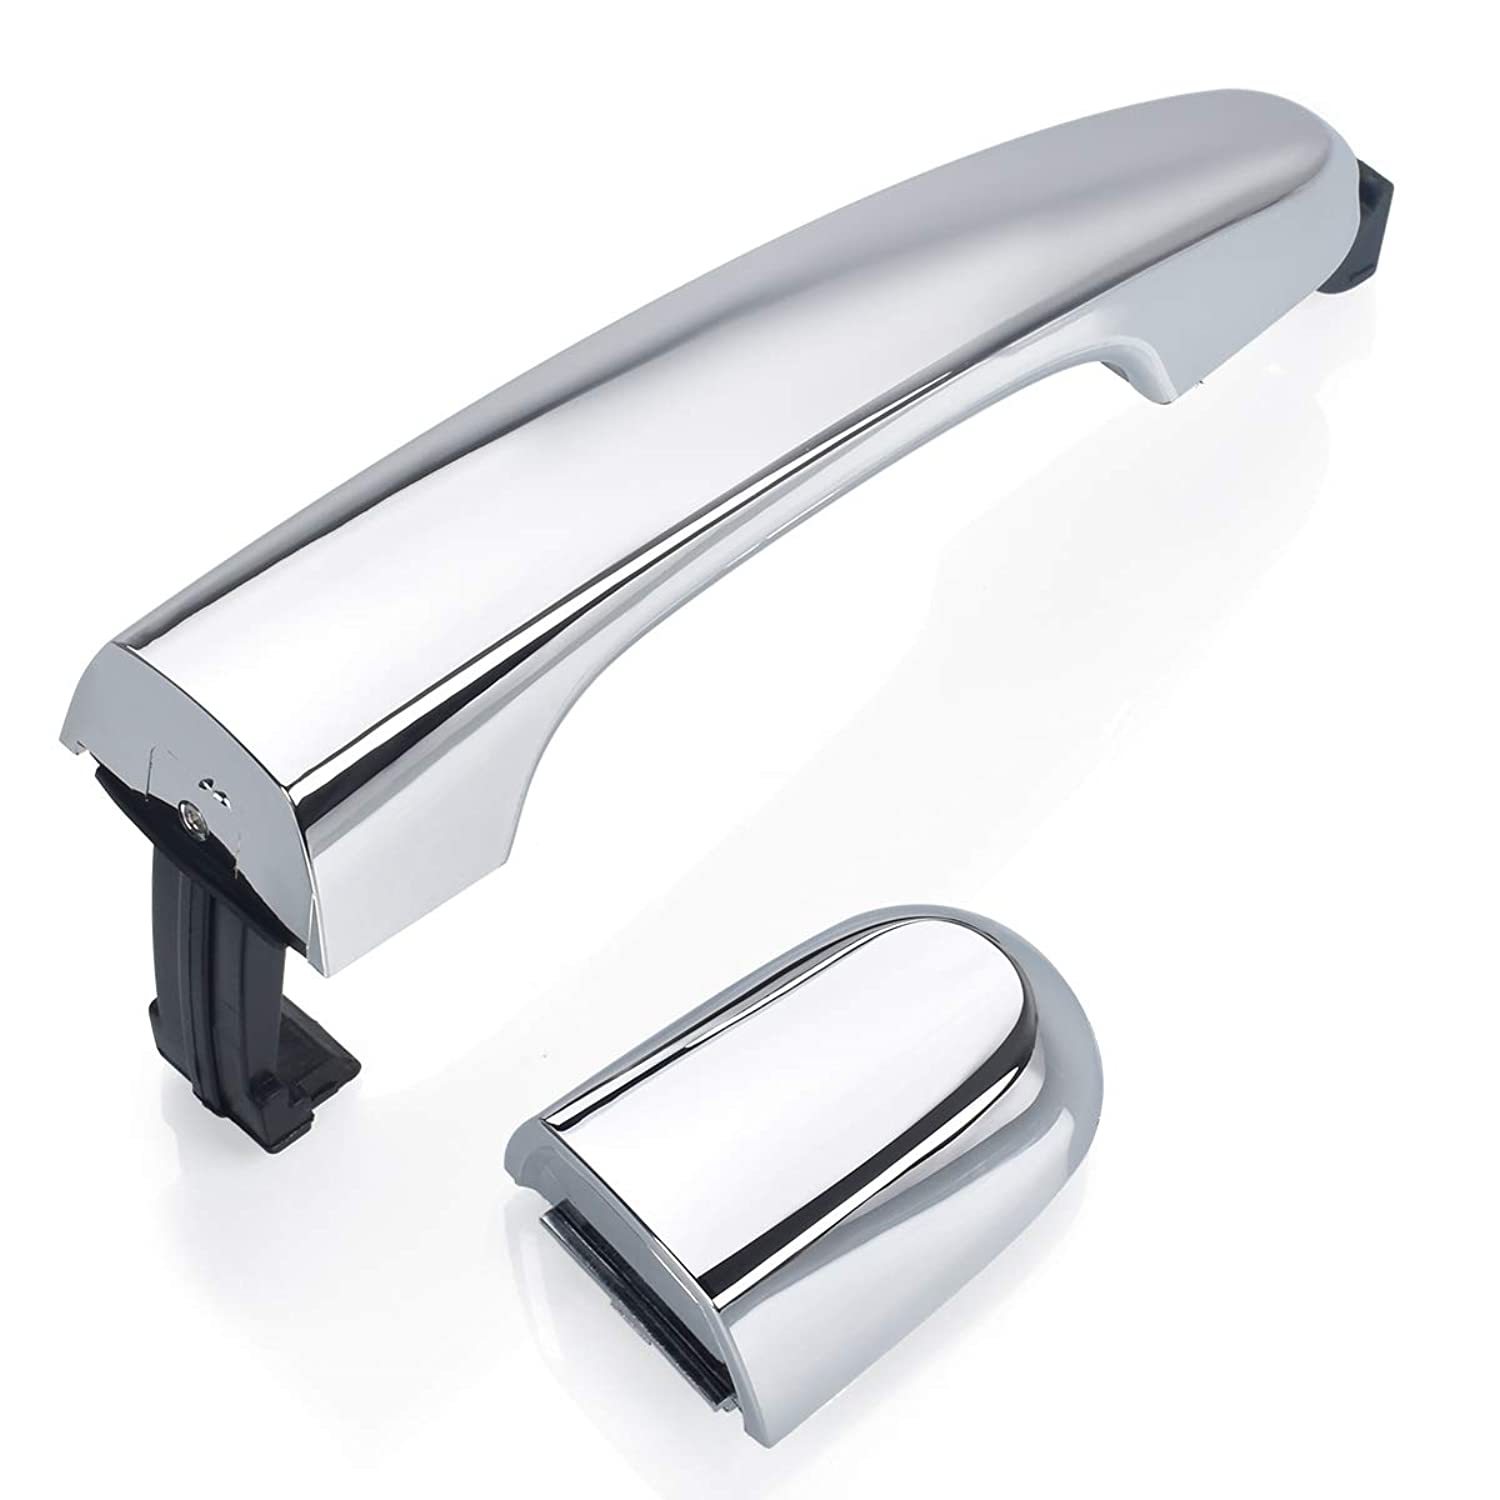 Primary image for Exterior Door Handle Rear Right Passenger Side Chrome Handle Compatibl